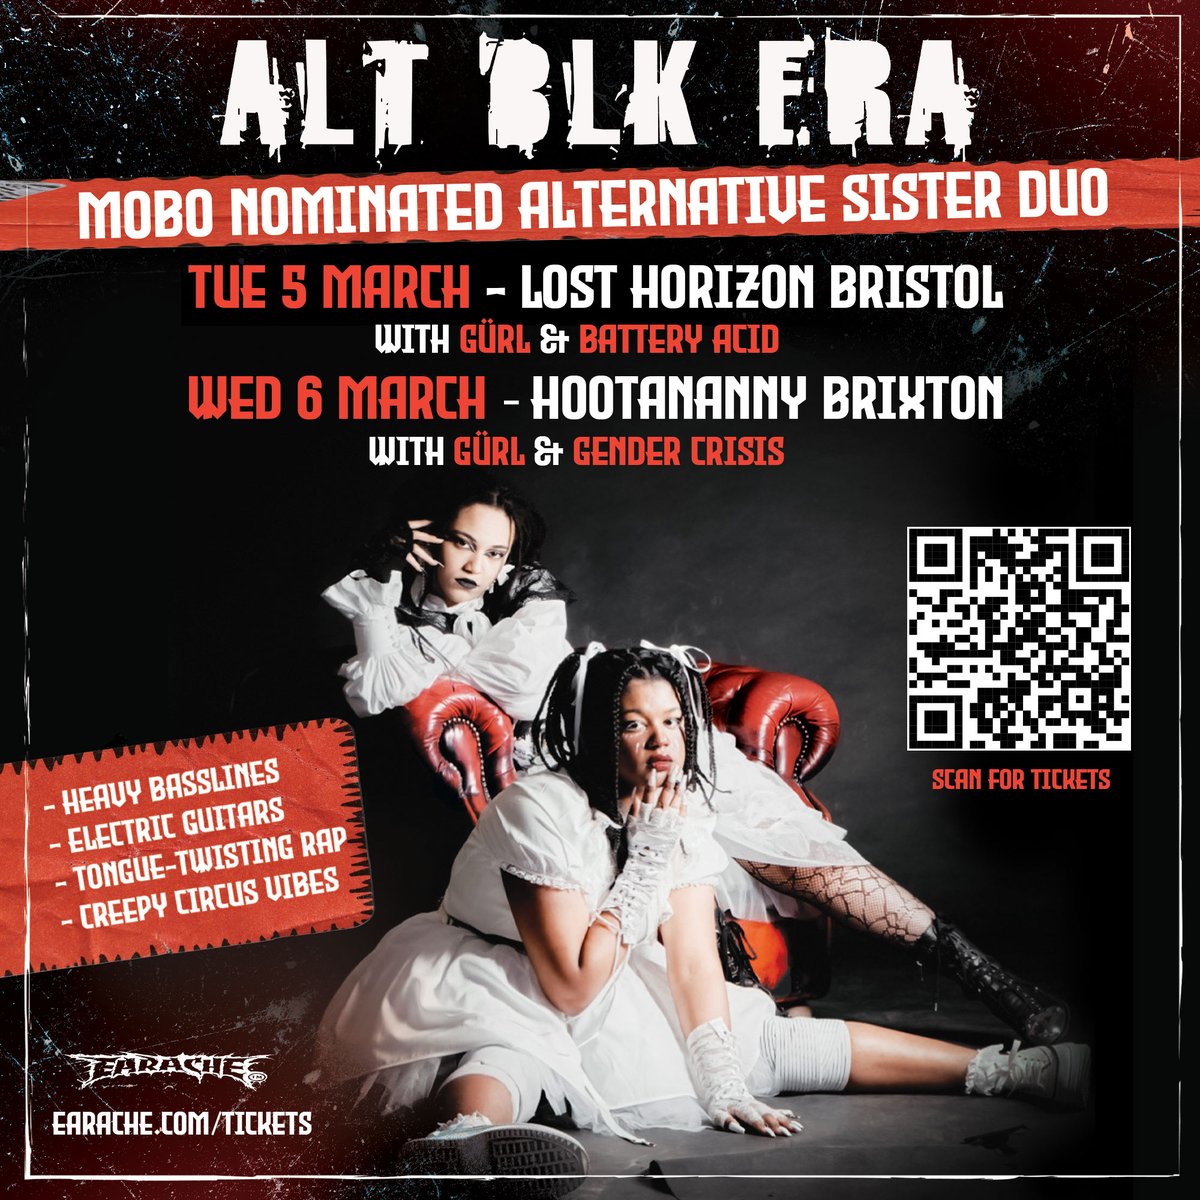 Low ticket warning⚠️ Witness the @MOBOAwards-nominated Alt sister duo @ALTBLKERA live and loud next week in Bristol (Lost Horizon, 5 Mar) and London (Hootananny Brixton, 6 Mar) for only £11! 😲 Head to earache.com/tickets to grab one of the final remaining tickets now!🎟️